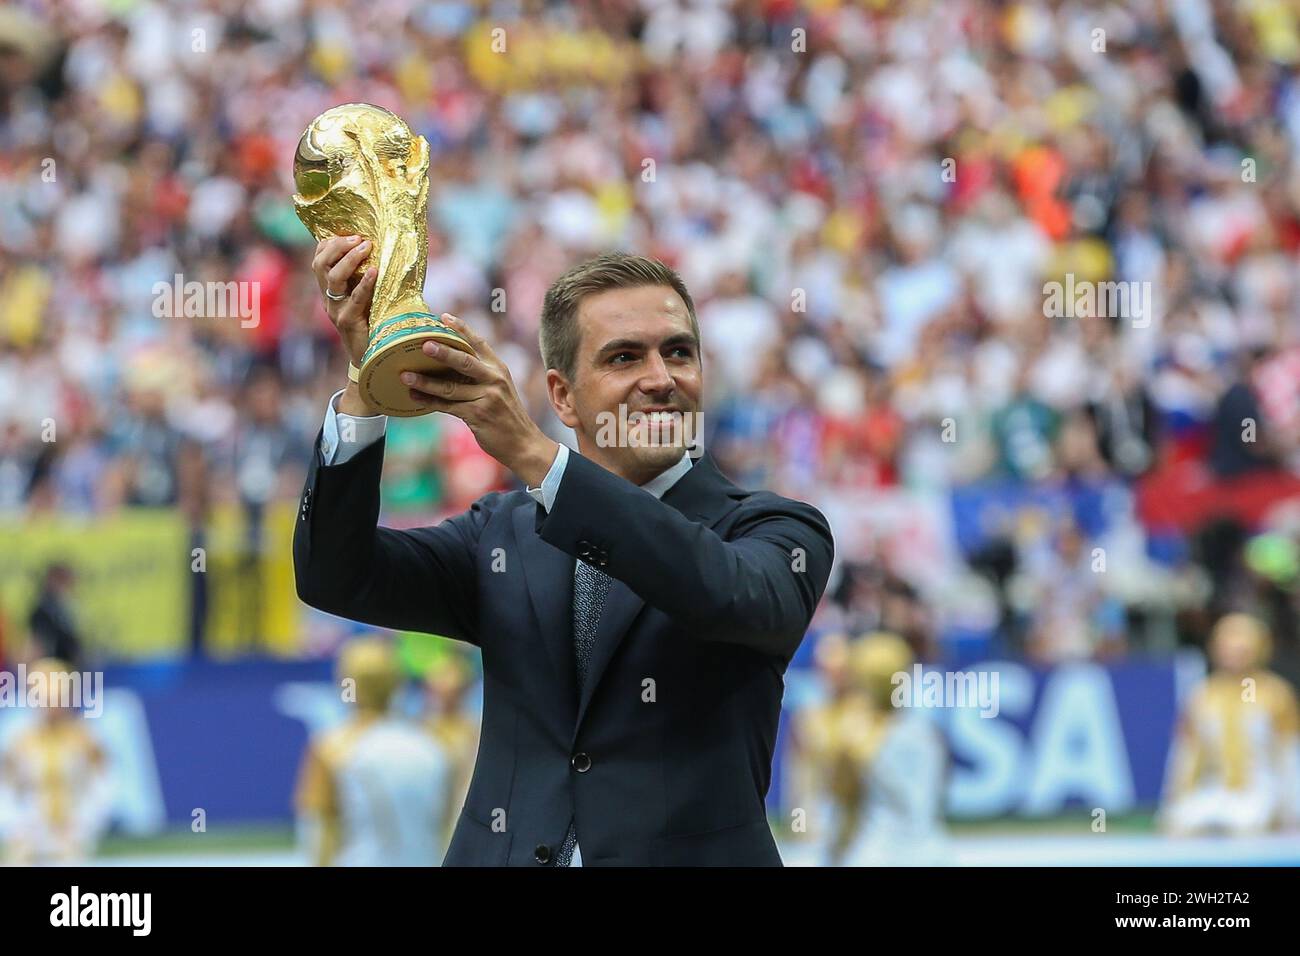 Moscow, Russia. 15th July, 2018. Philipp Lahm of Germany presents the world cup trophy during the FIFA World Cup 2018 Final match between France and Croatia at Luzhniki Stadium. Final score: France 4:2 Croatia. Credit: SOPA Images Limited/Alamy Live News Stock Photo